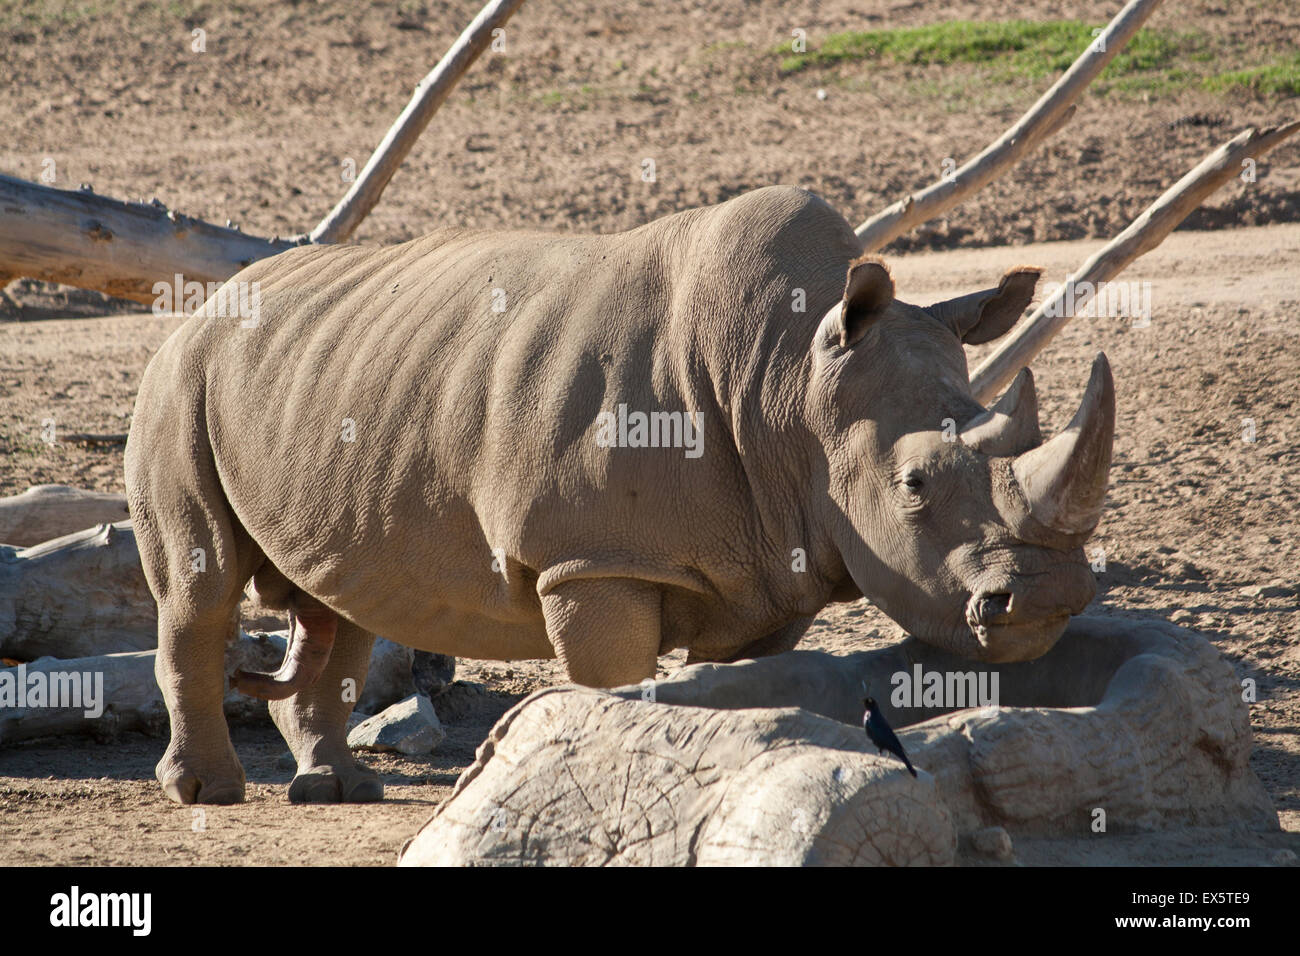 A rhino drinking from a water trough Stock Photo